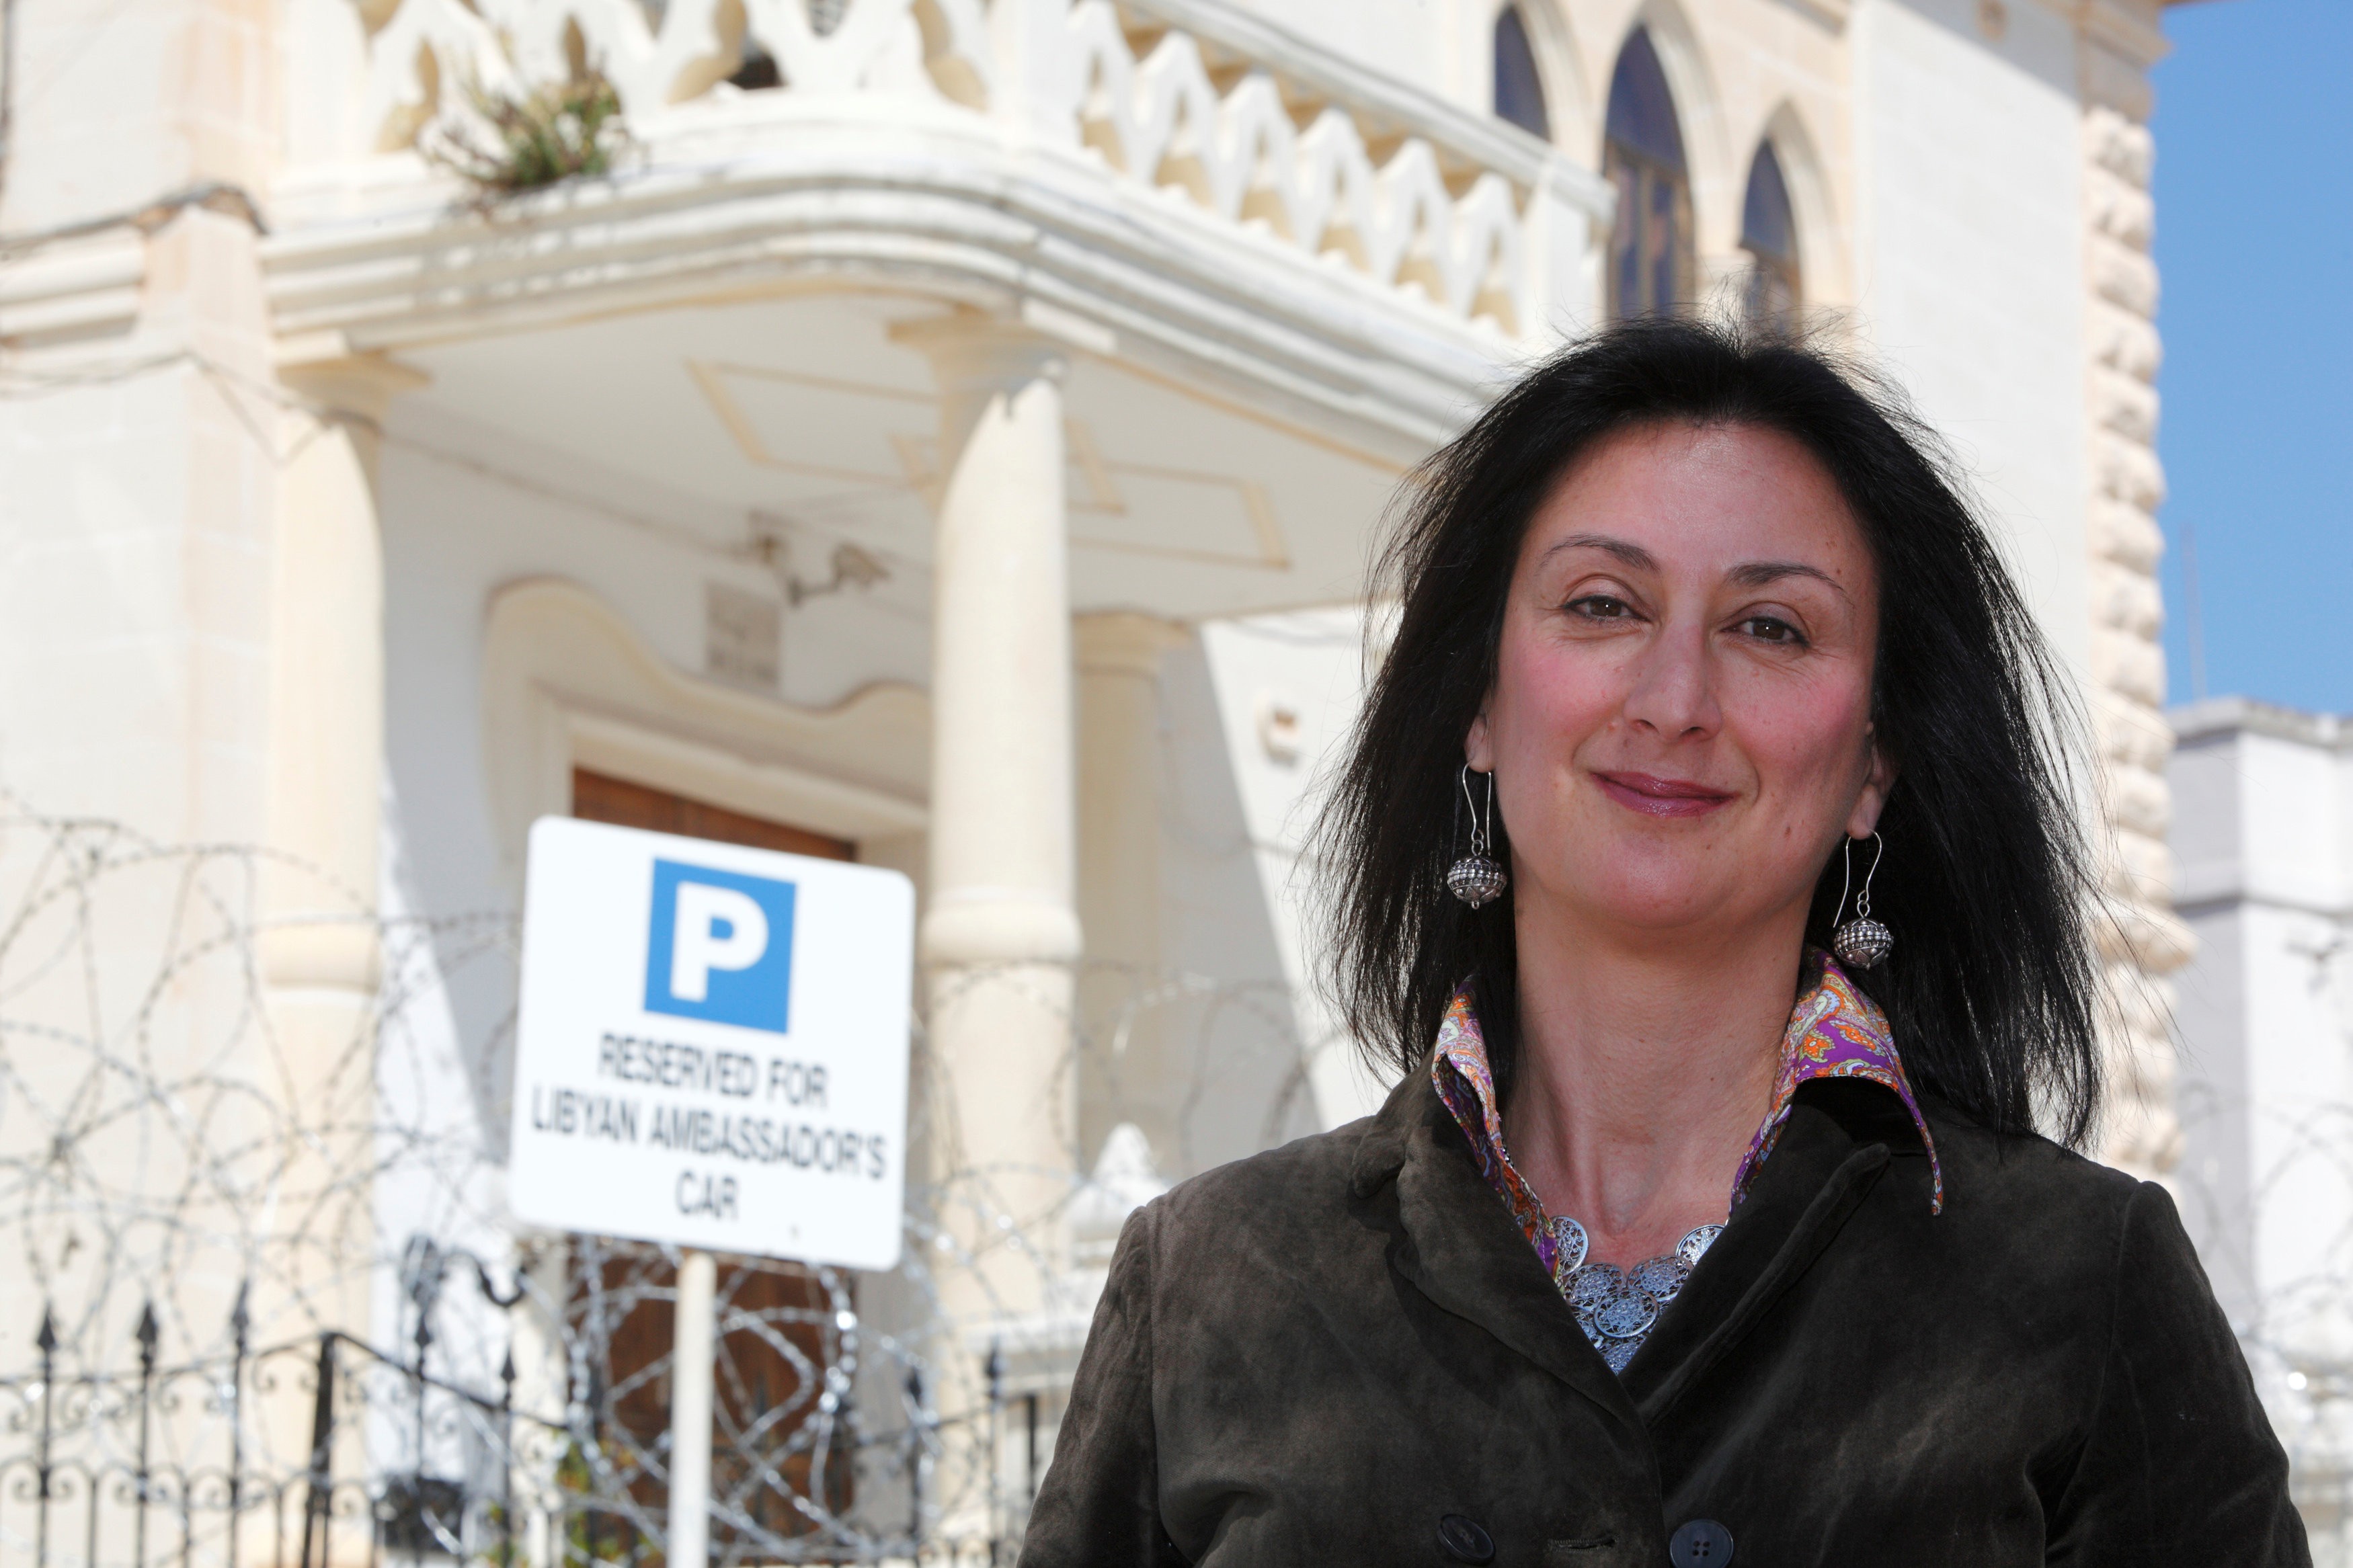 Blogger Caruana Galizia had made repeated and detailed corruption allegations against government figures